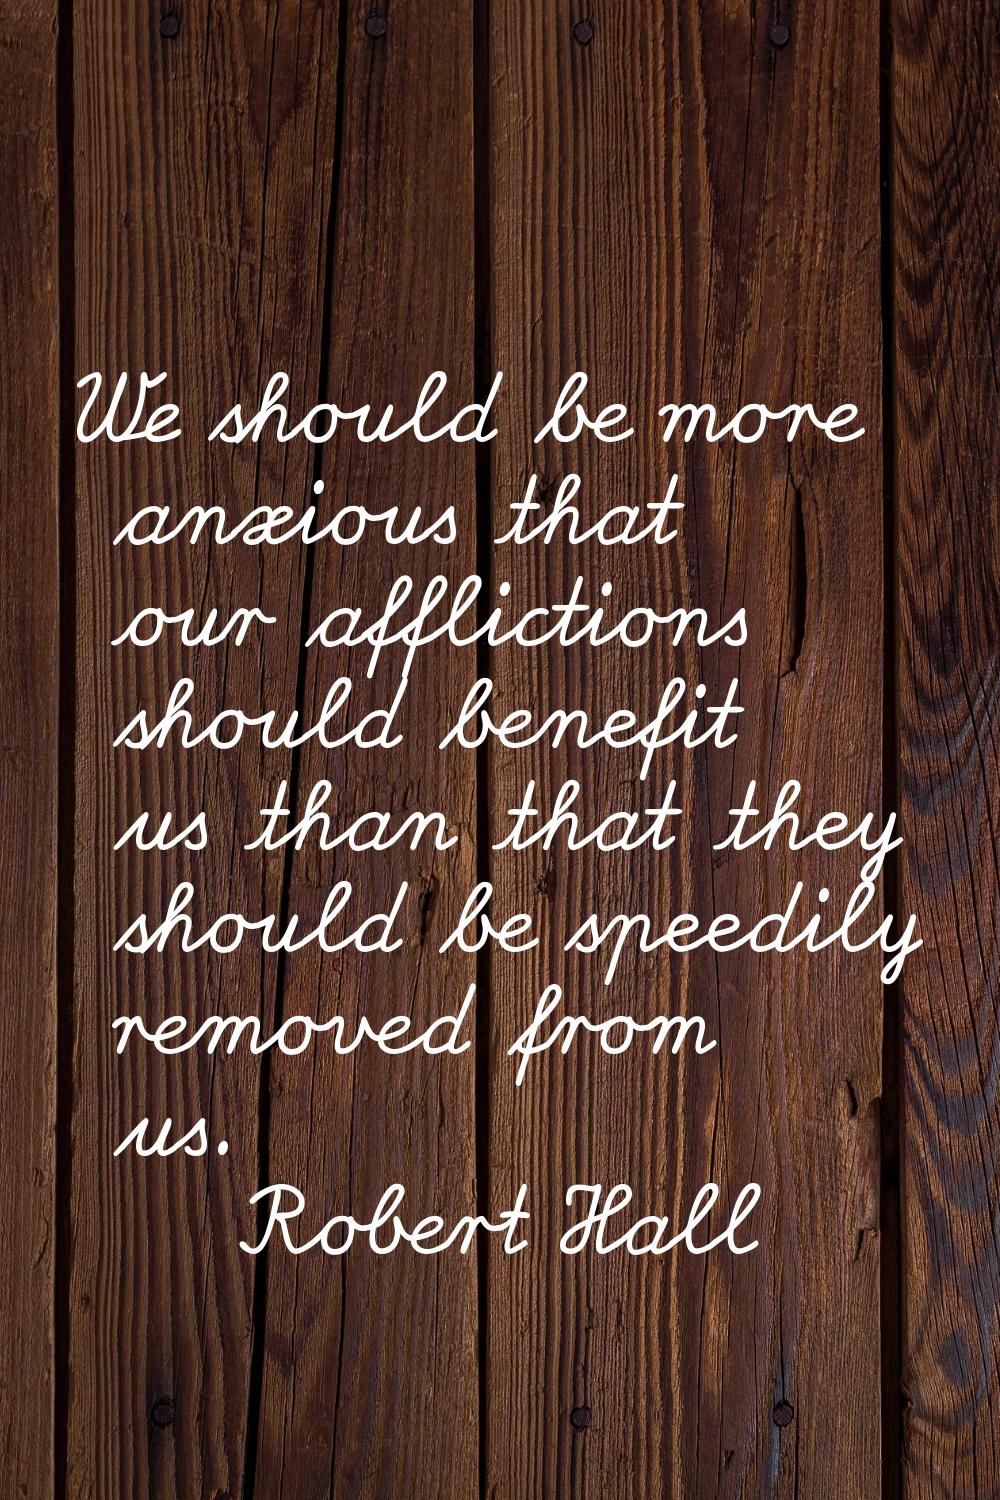 We should be more anxious that our afflictions should benefit us than that they should be speedily 